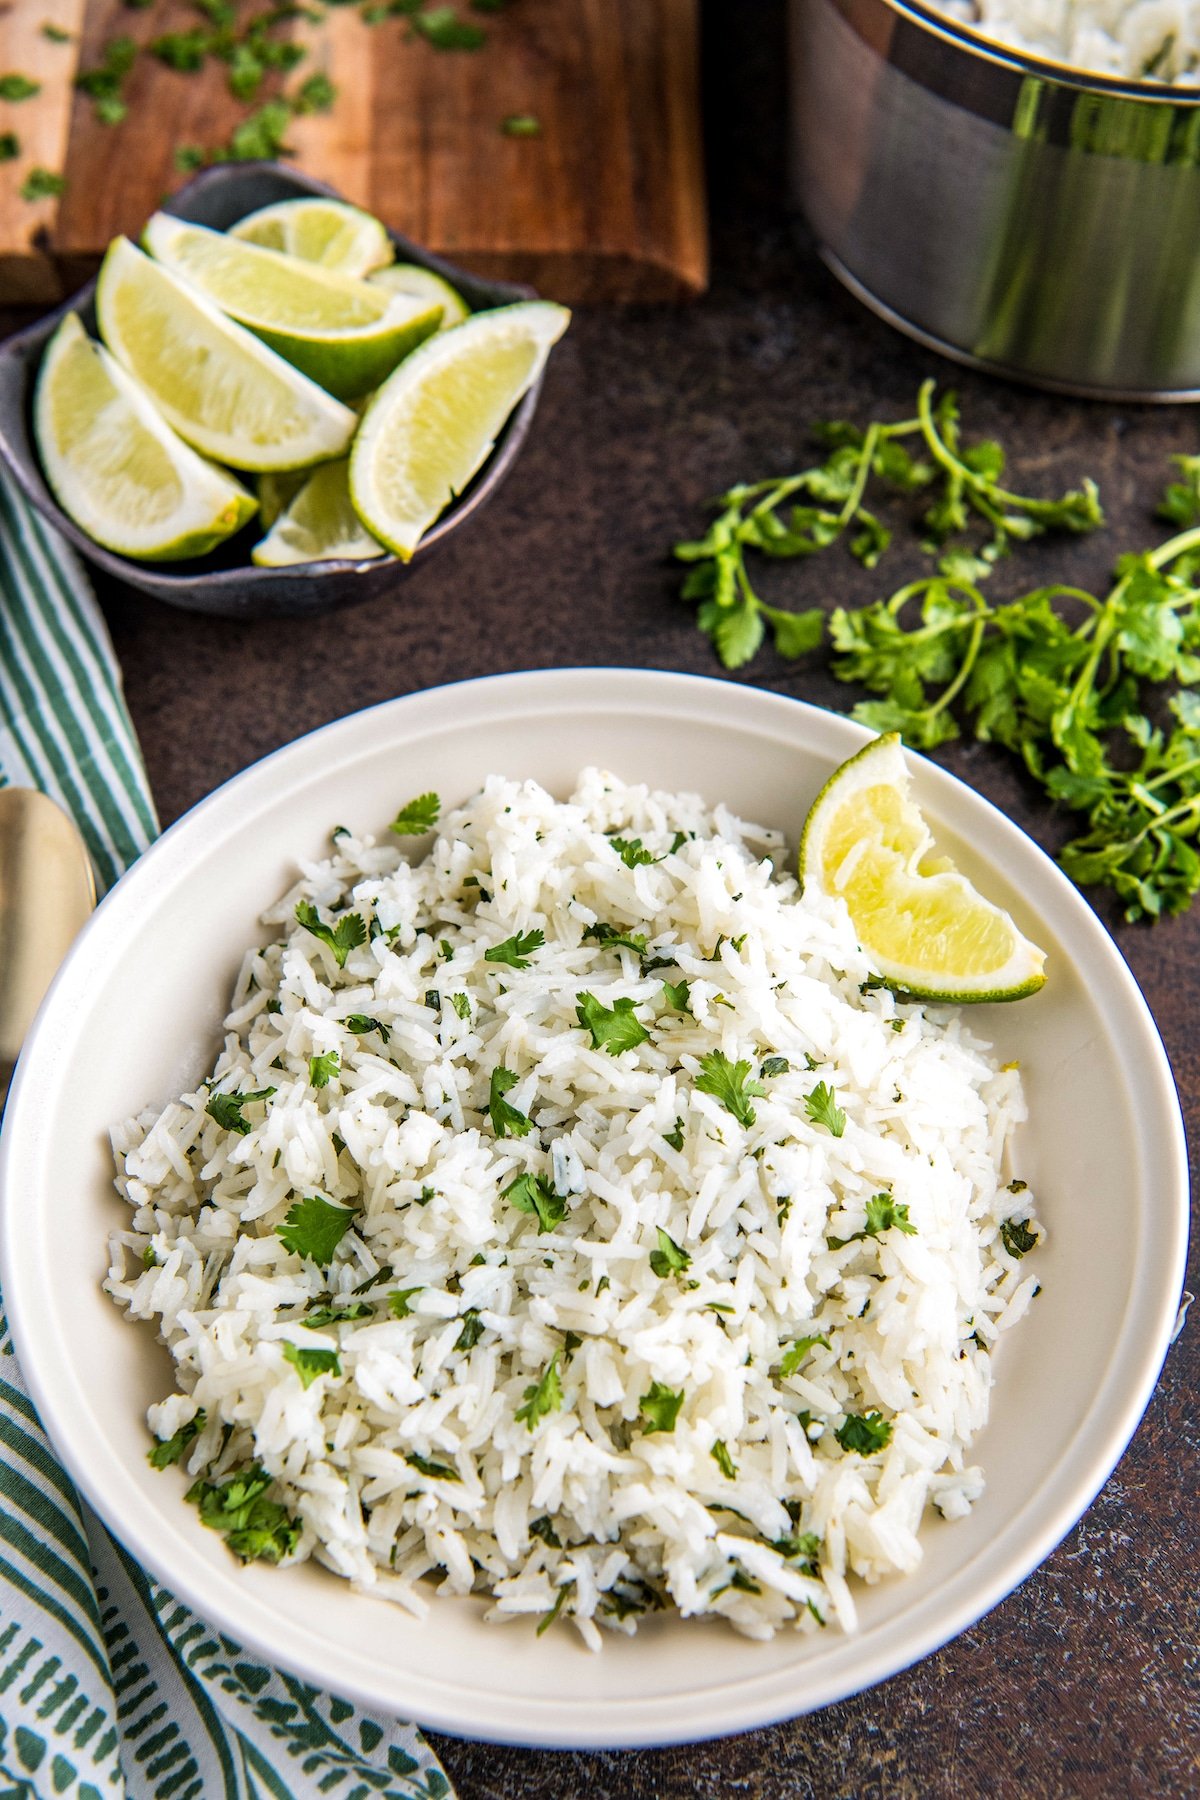 Cilantro lime rice in a white bowl with a wedge of lime.